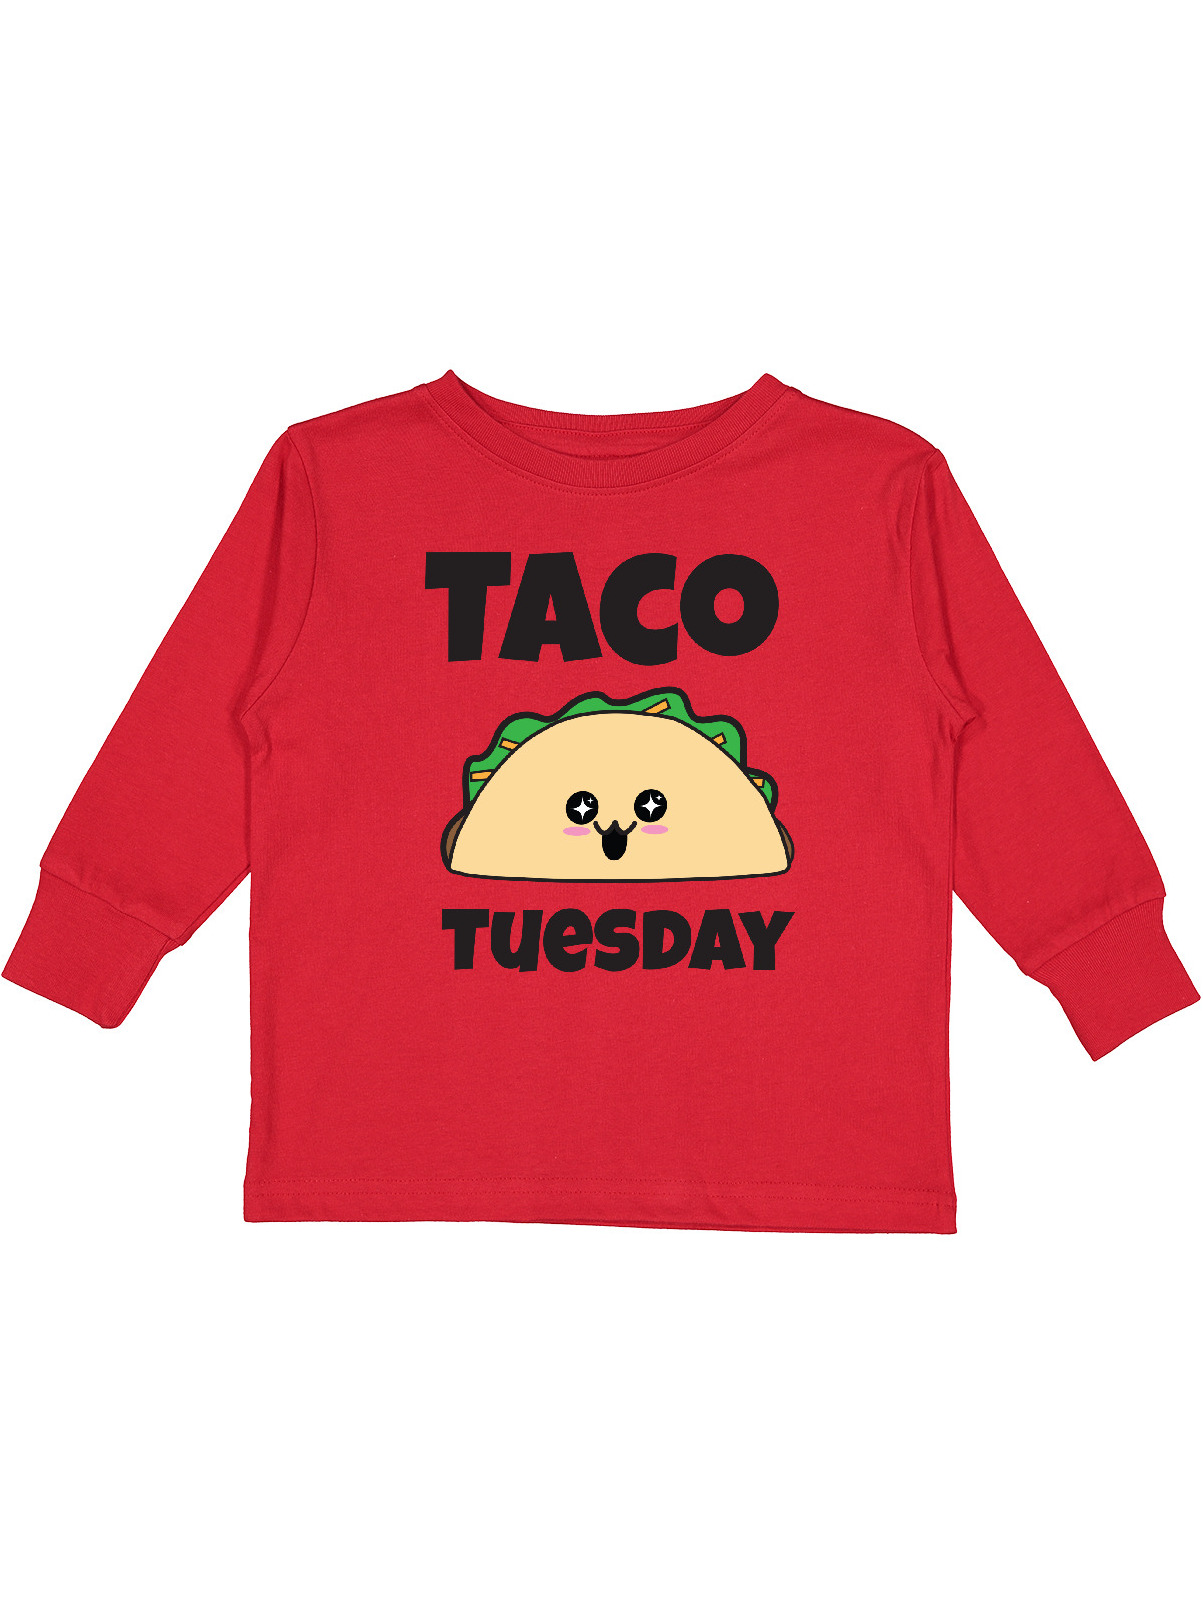 Friendly Taco Tshirt Tee Shirt Cute Funny Kawaii Graphic Cartoony Design  for Apparel Accessories Home Decor Skins Totes Bags Wall Art Stickers  Poster for Sale by Rocbebe